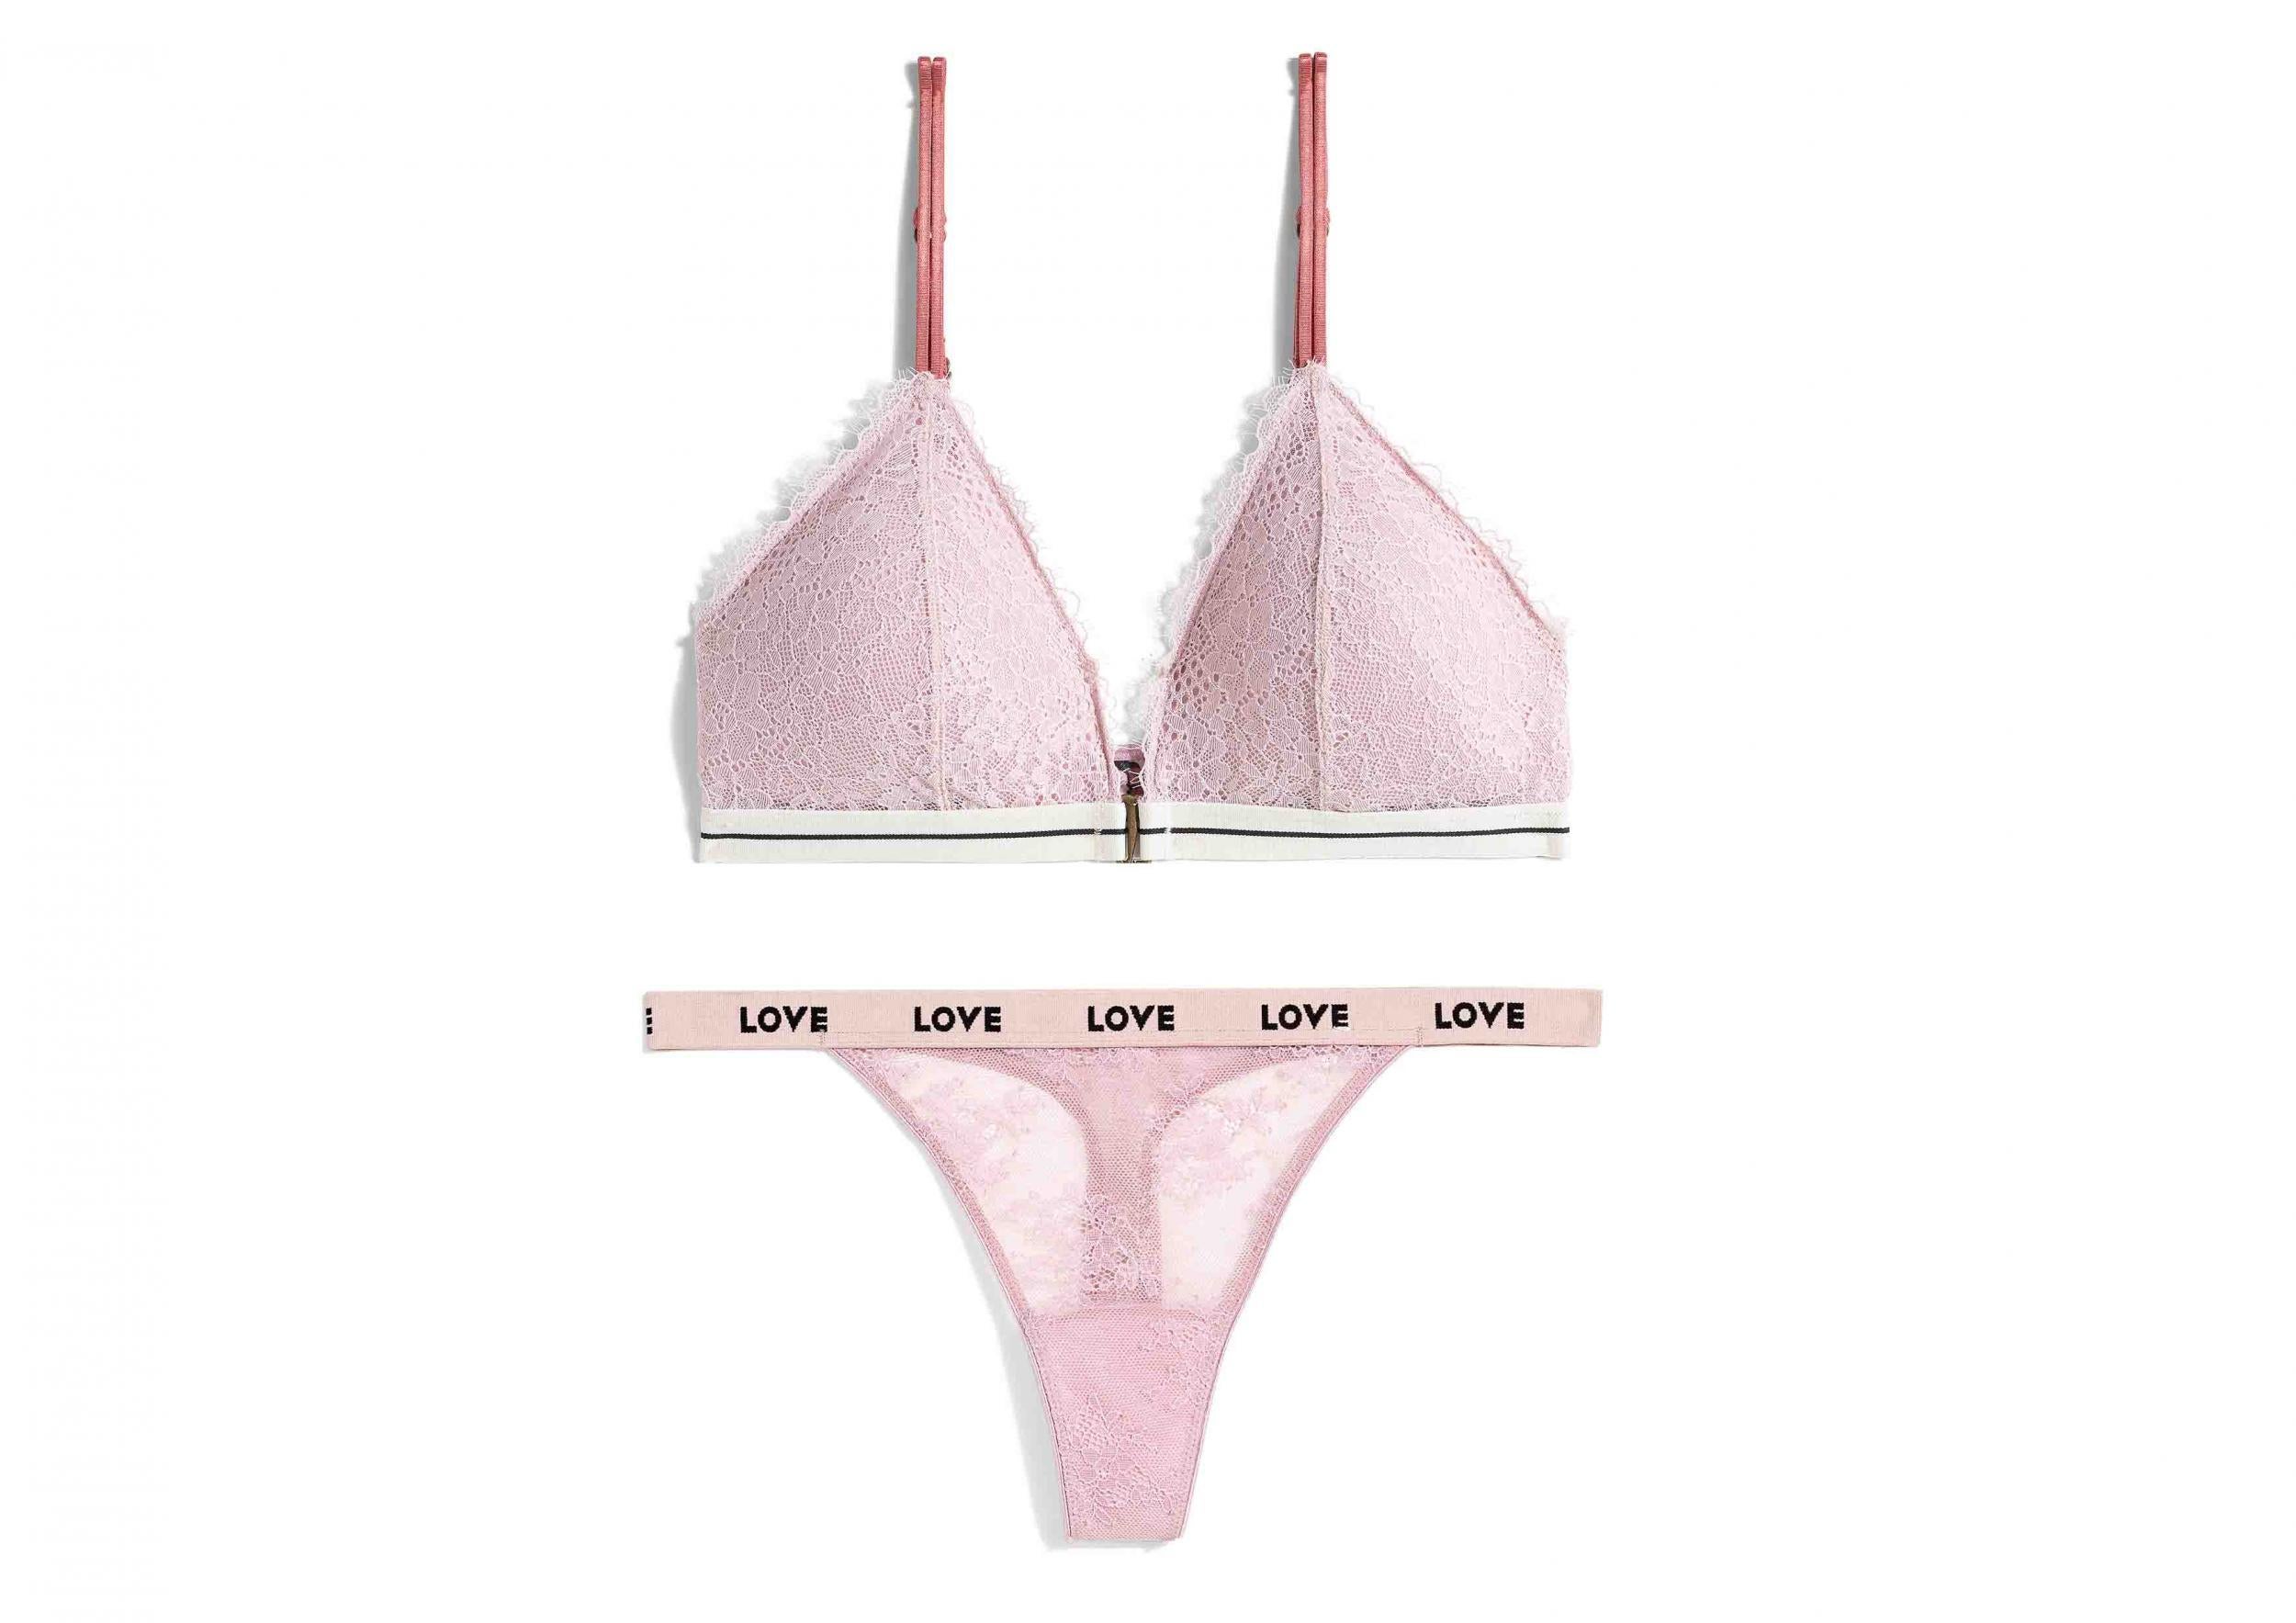 H&M is launching a lingerie collection with Love Stories, The Independent